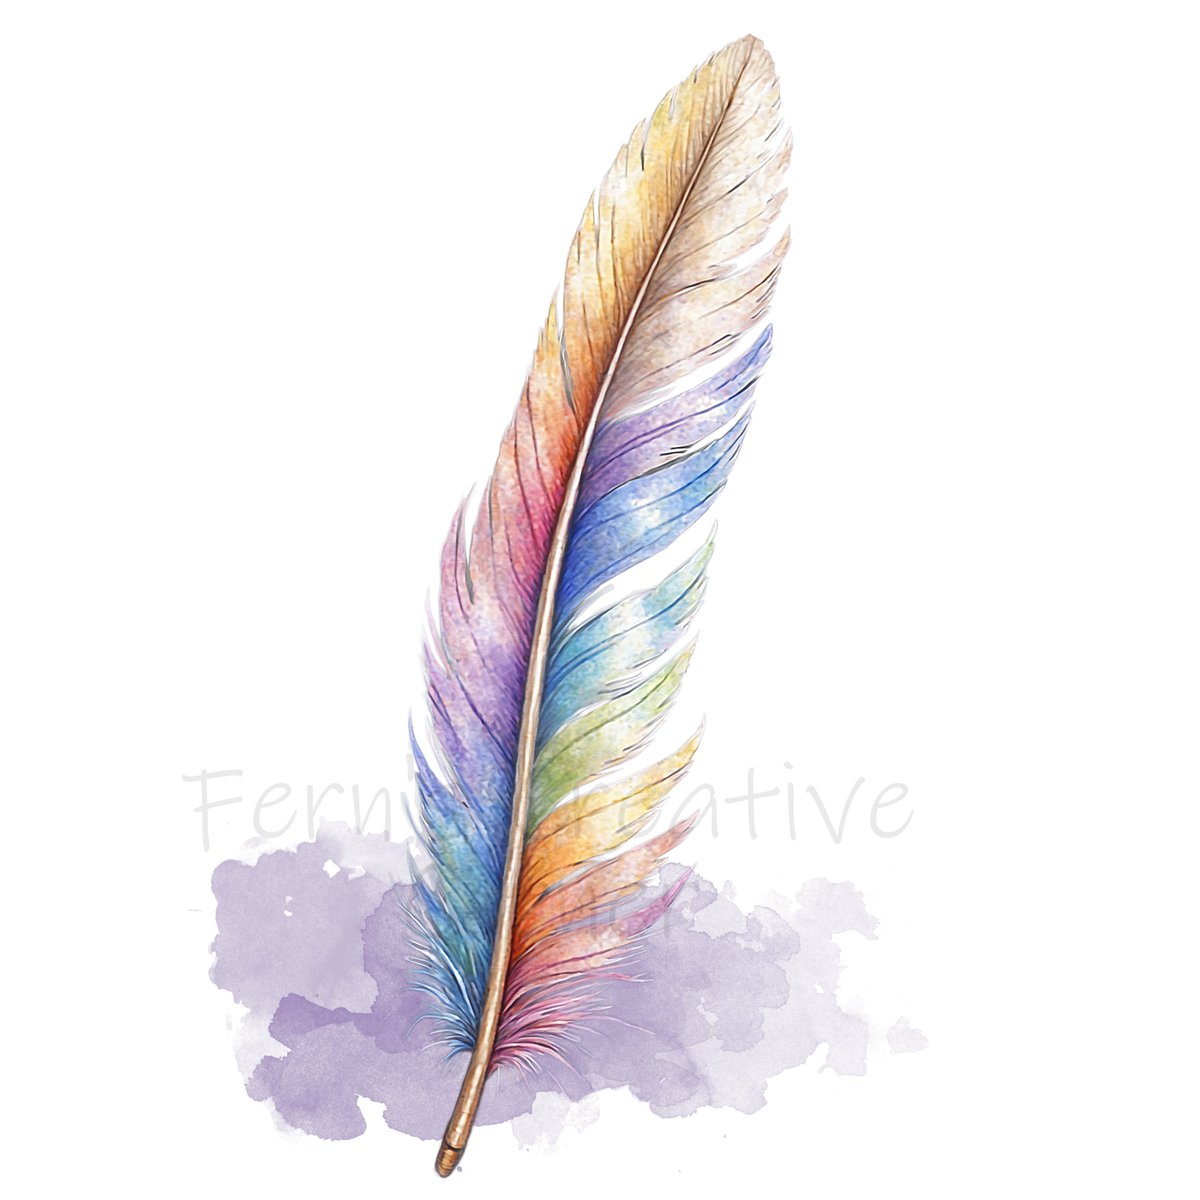 Is creating new art.  The Colorful Feather in Watercolor Style...

#redbubble #newart #pastel #NewArtist #digitalart #Stickers #sticker #love #AIArtistCommunity #AIArtGallery  #aiartwork #clipart #artwork #art #love